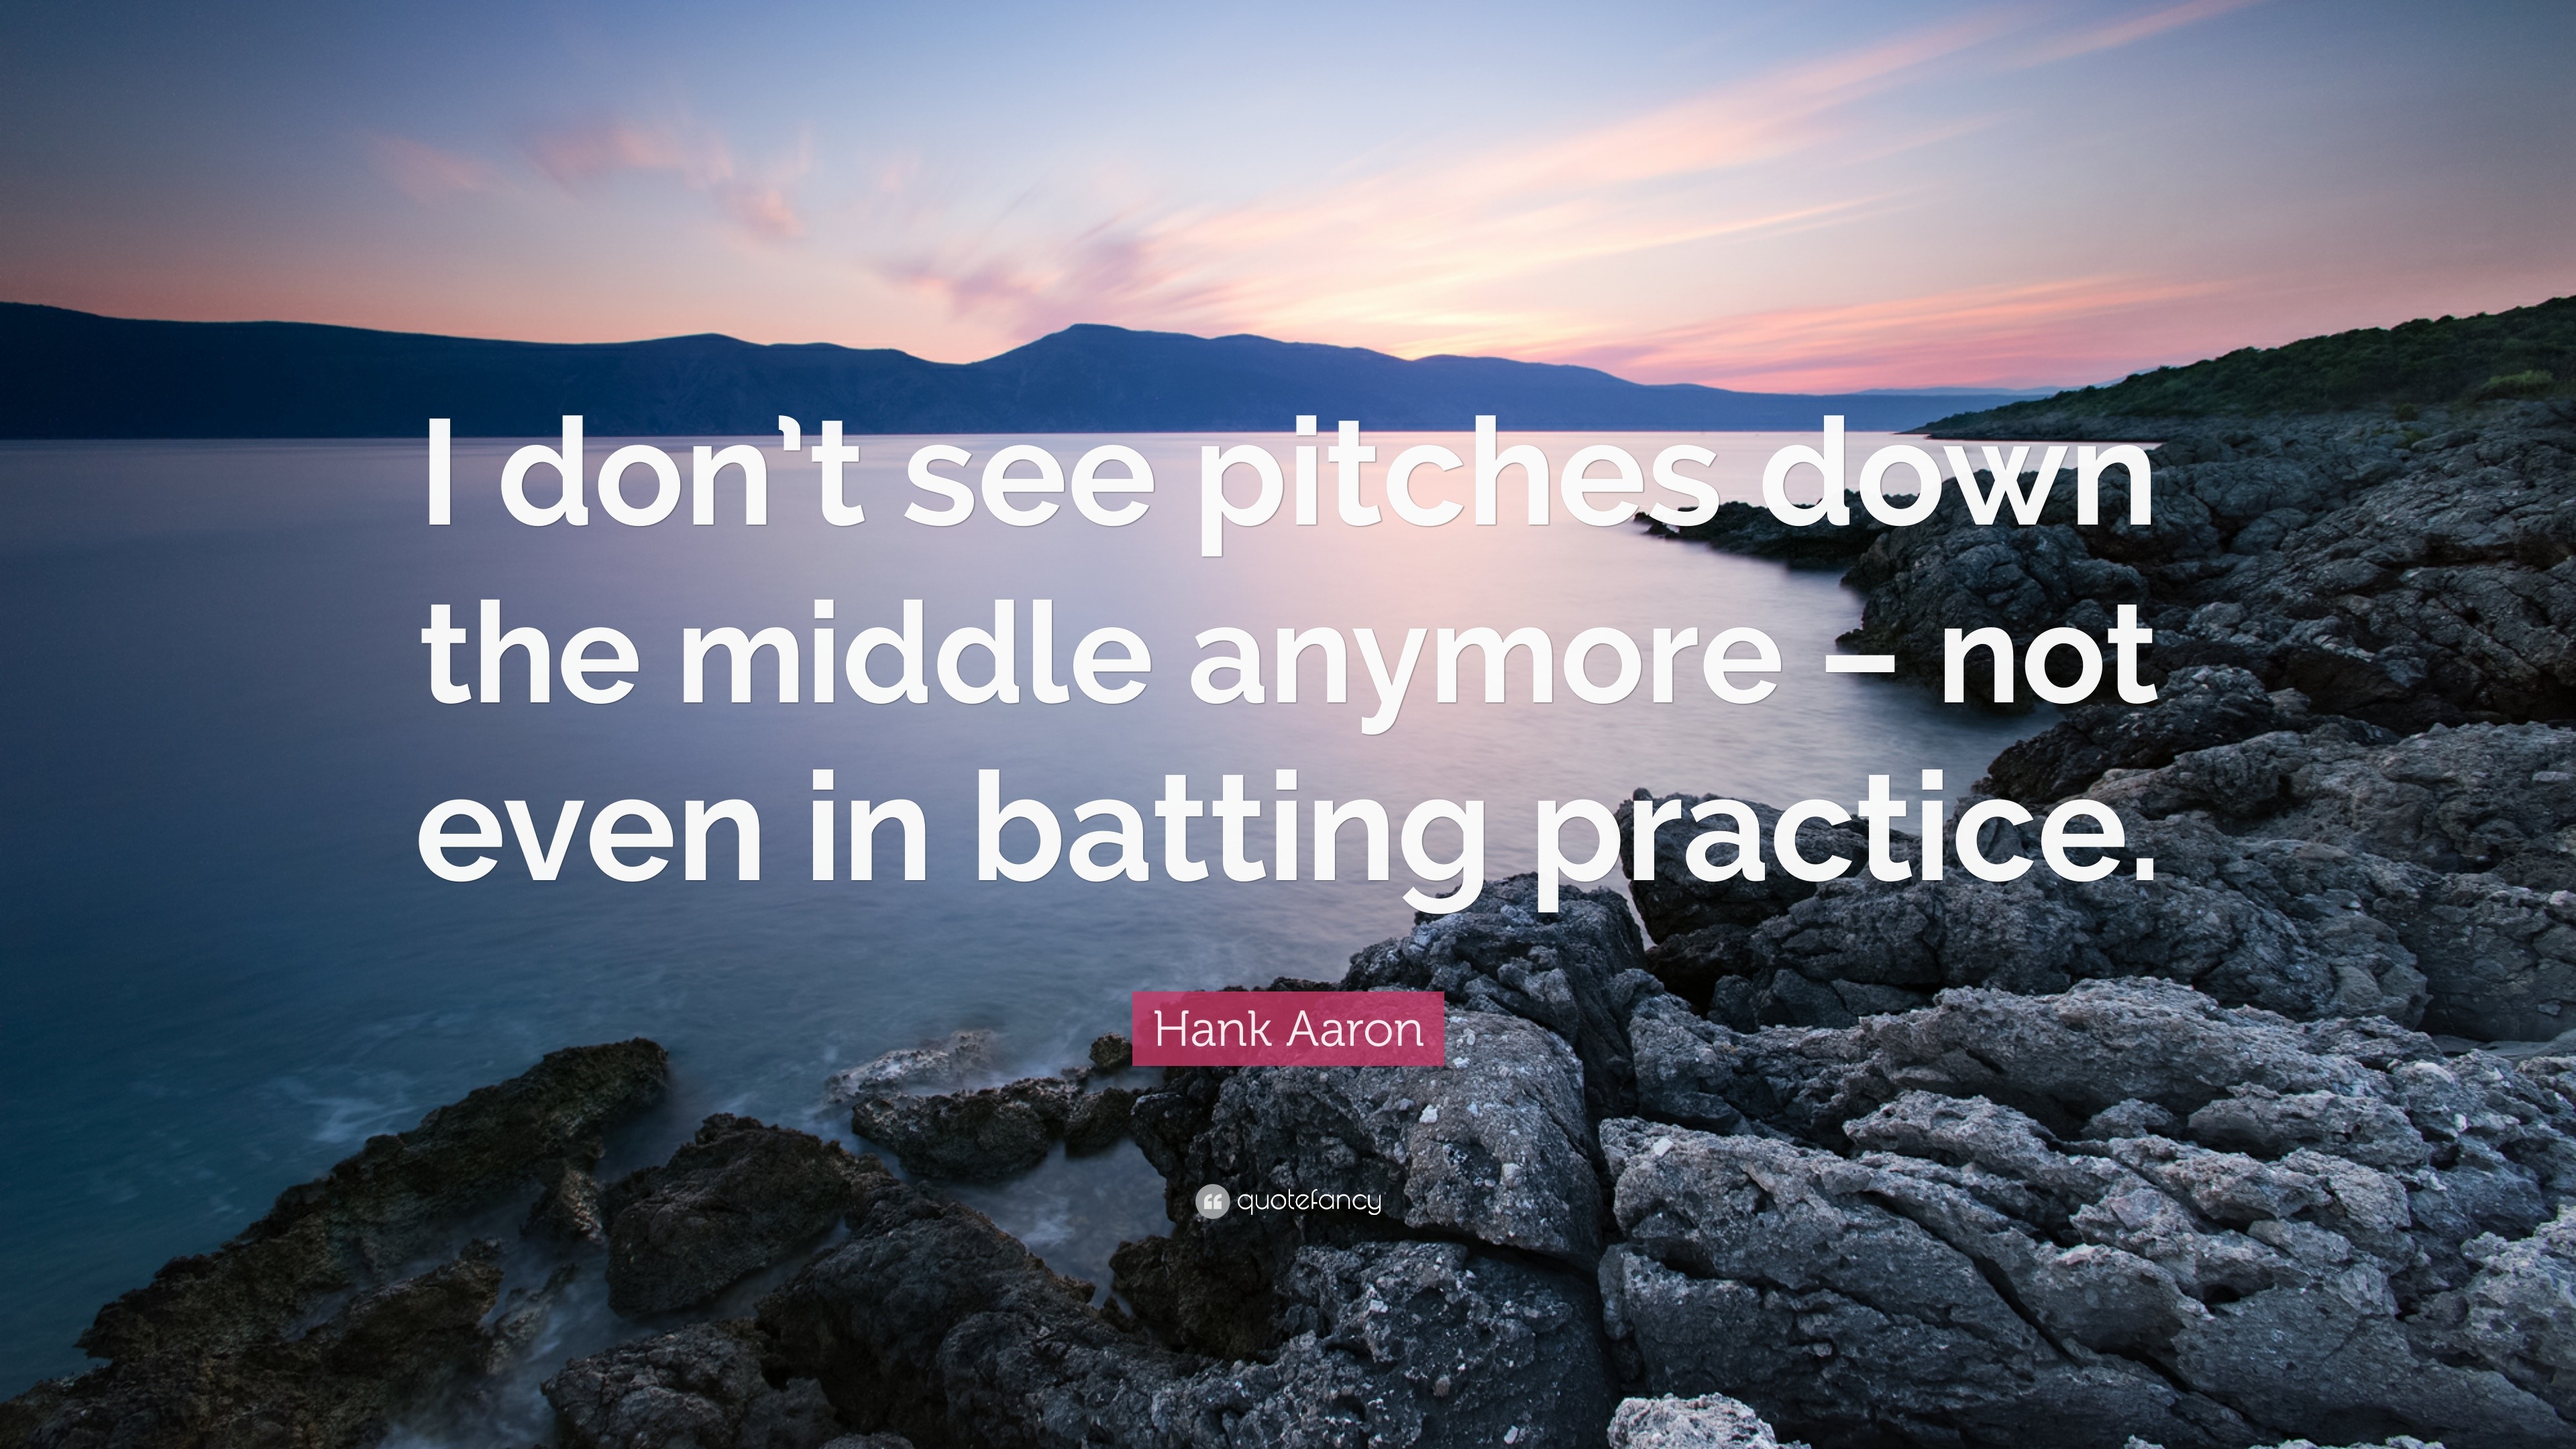 Hank Aaron Quote: “I don't see pitches down the middle anymore